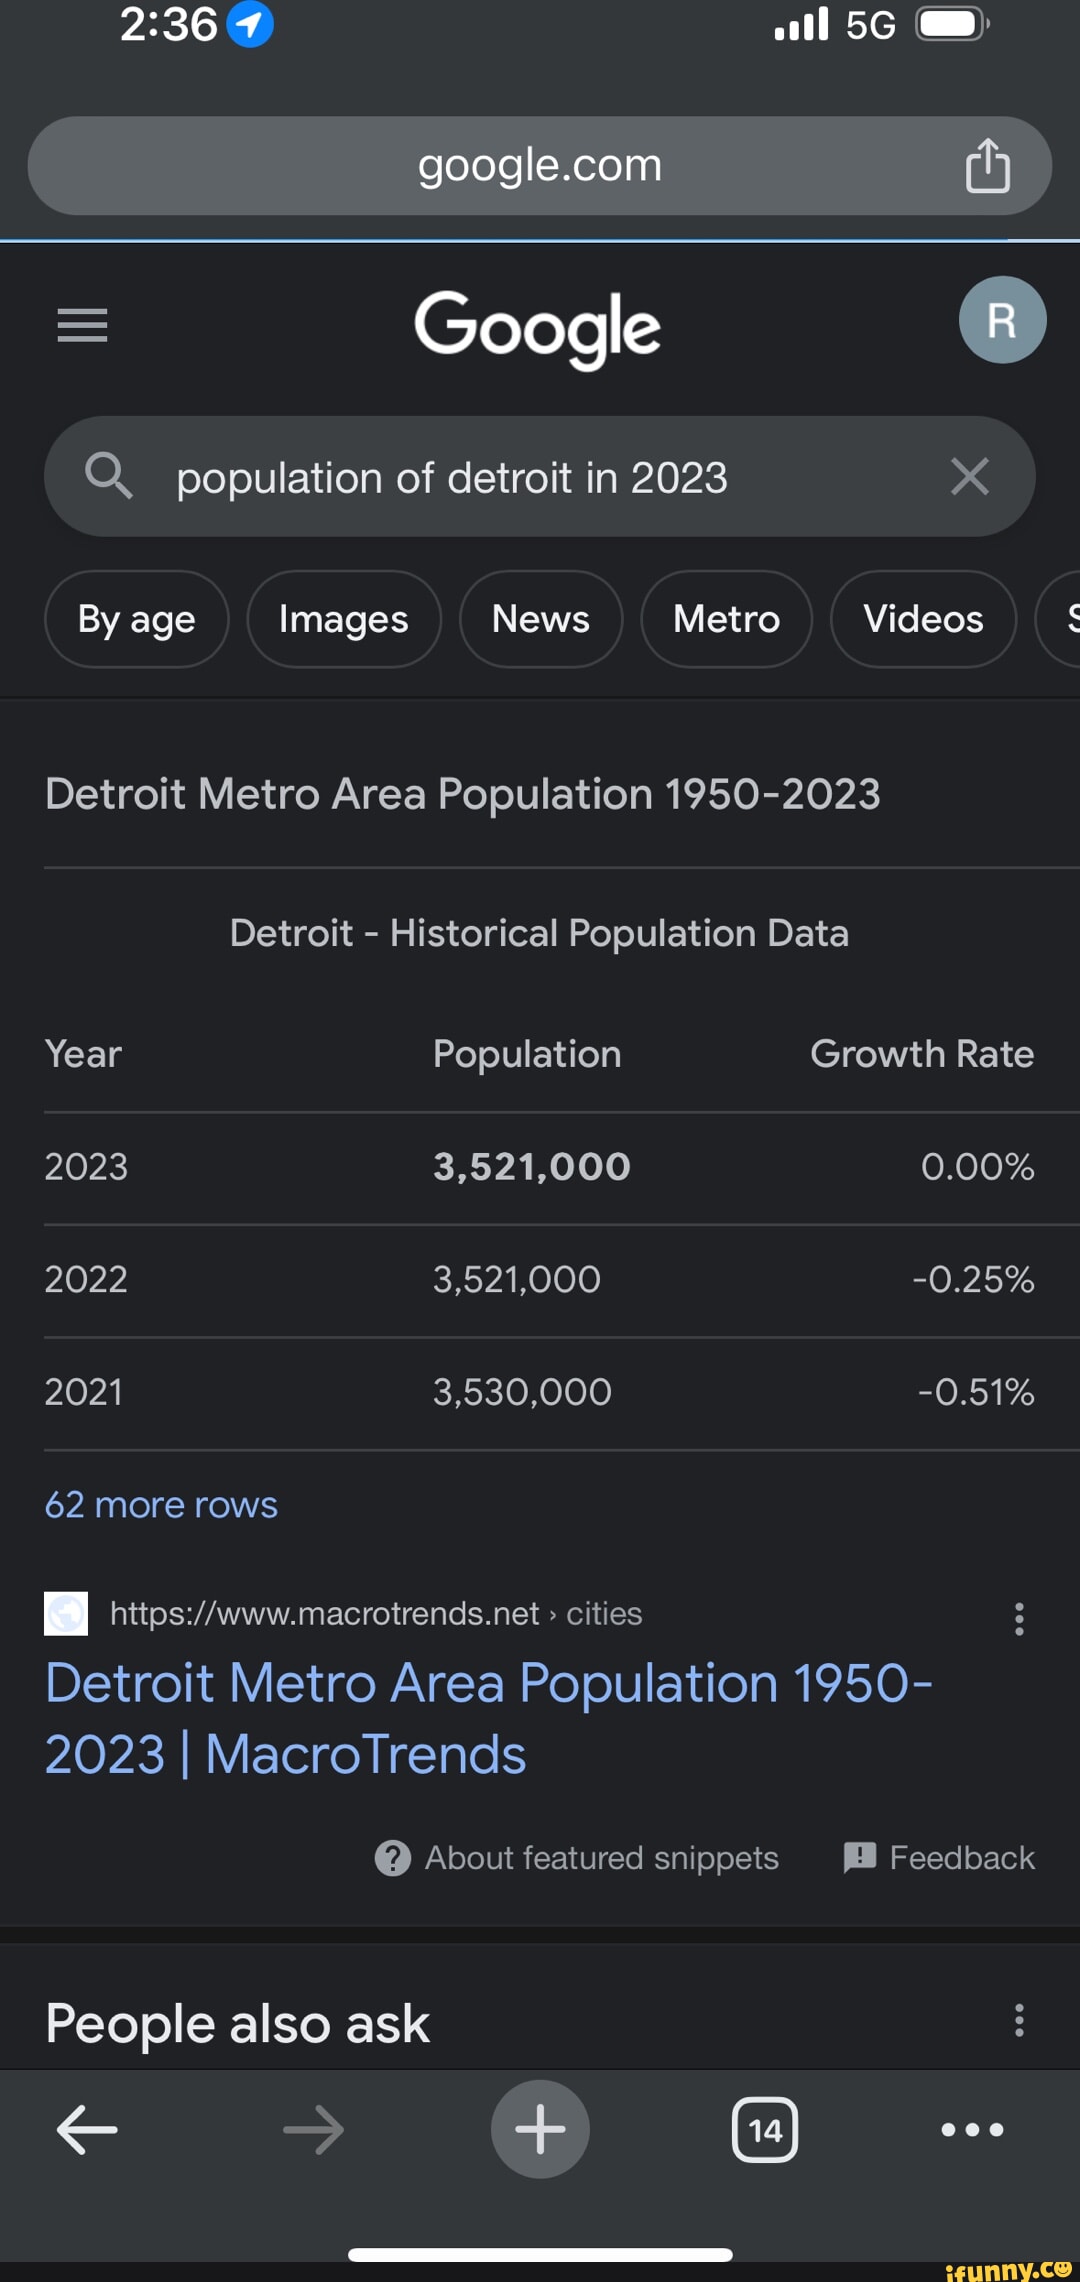 google-population-of-detroit-in-2023-by-age-images-news-metro-videos